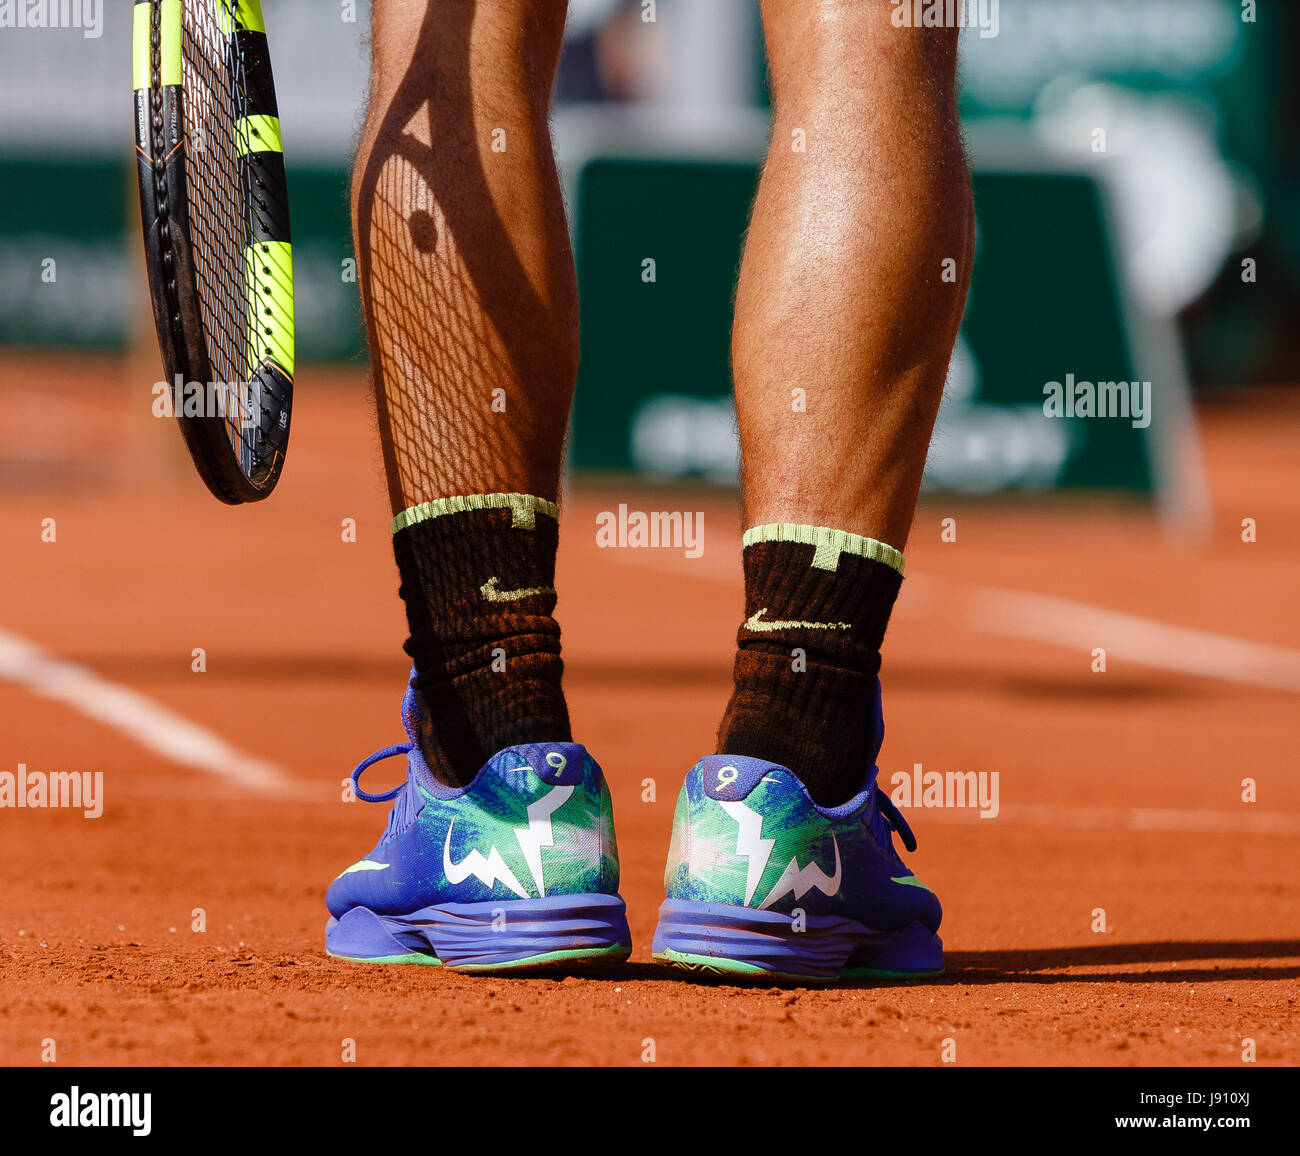 Paris, France, 31 May 2017: Rafael Nadal is in action during his second  round match at the 2017 Tennis French Open in Roland Garros Paris. Credit: Frank Molter/Alamy Live News Stock Photo